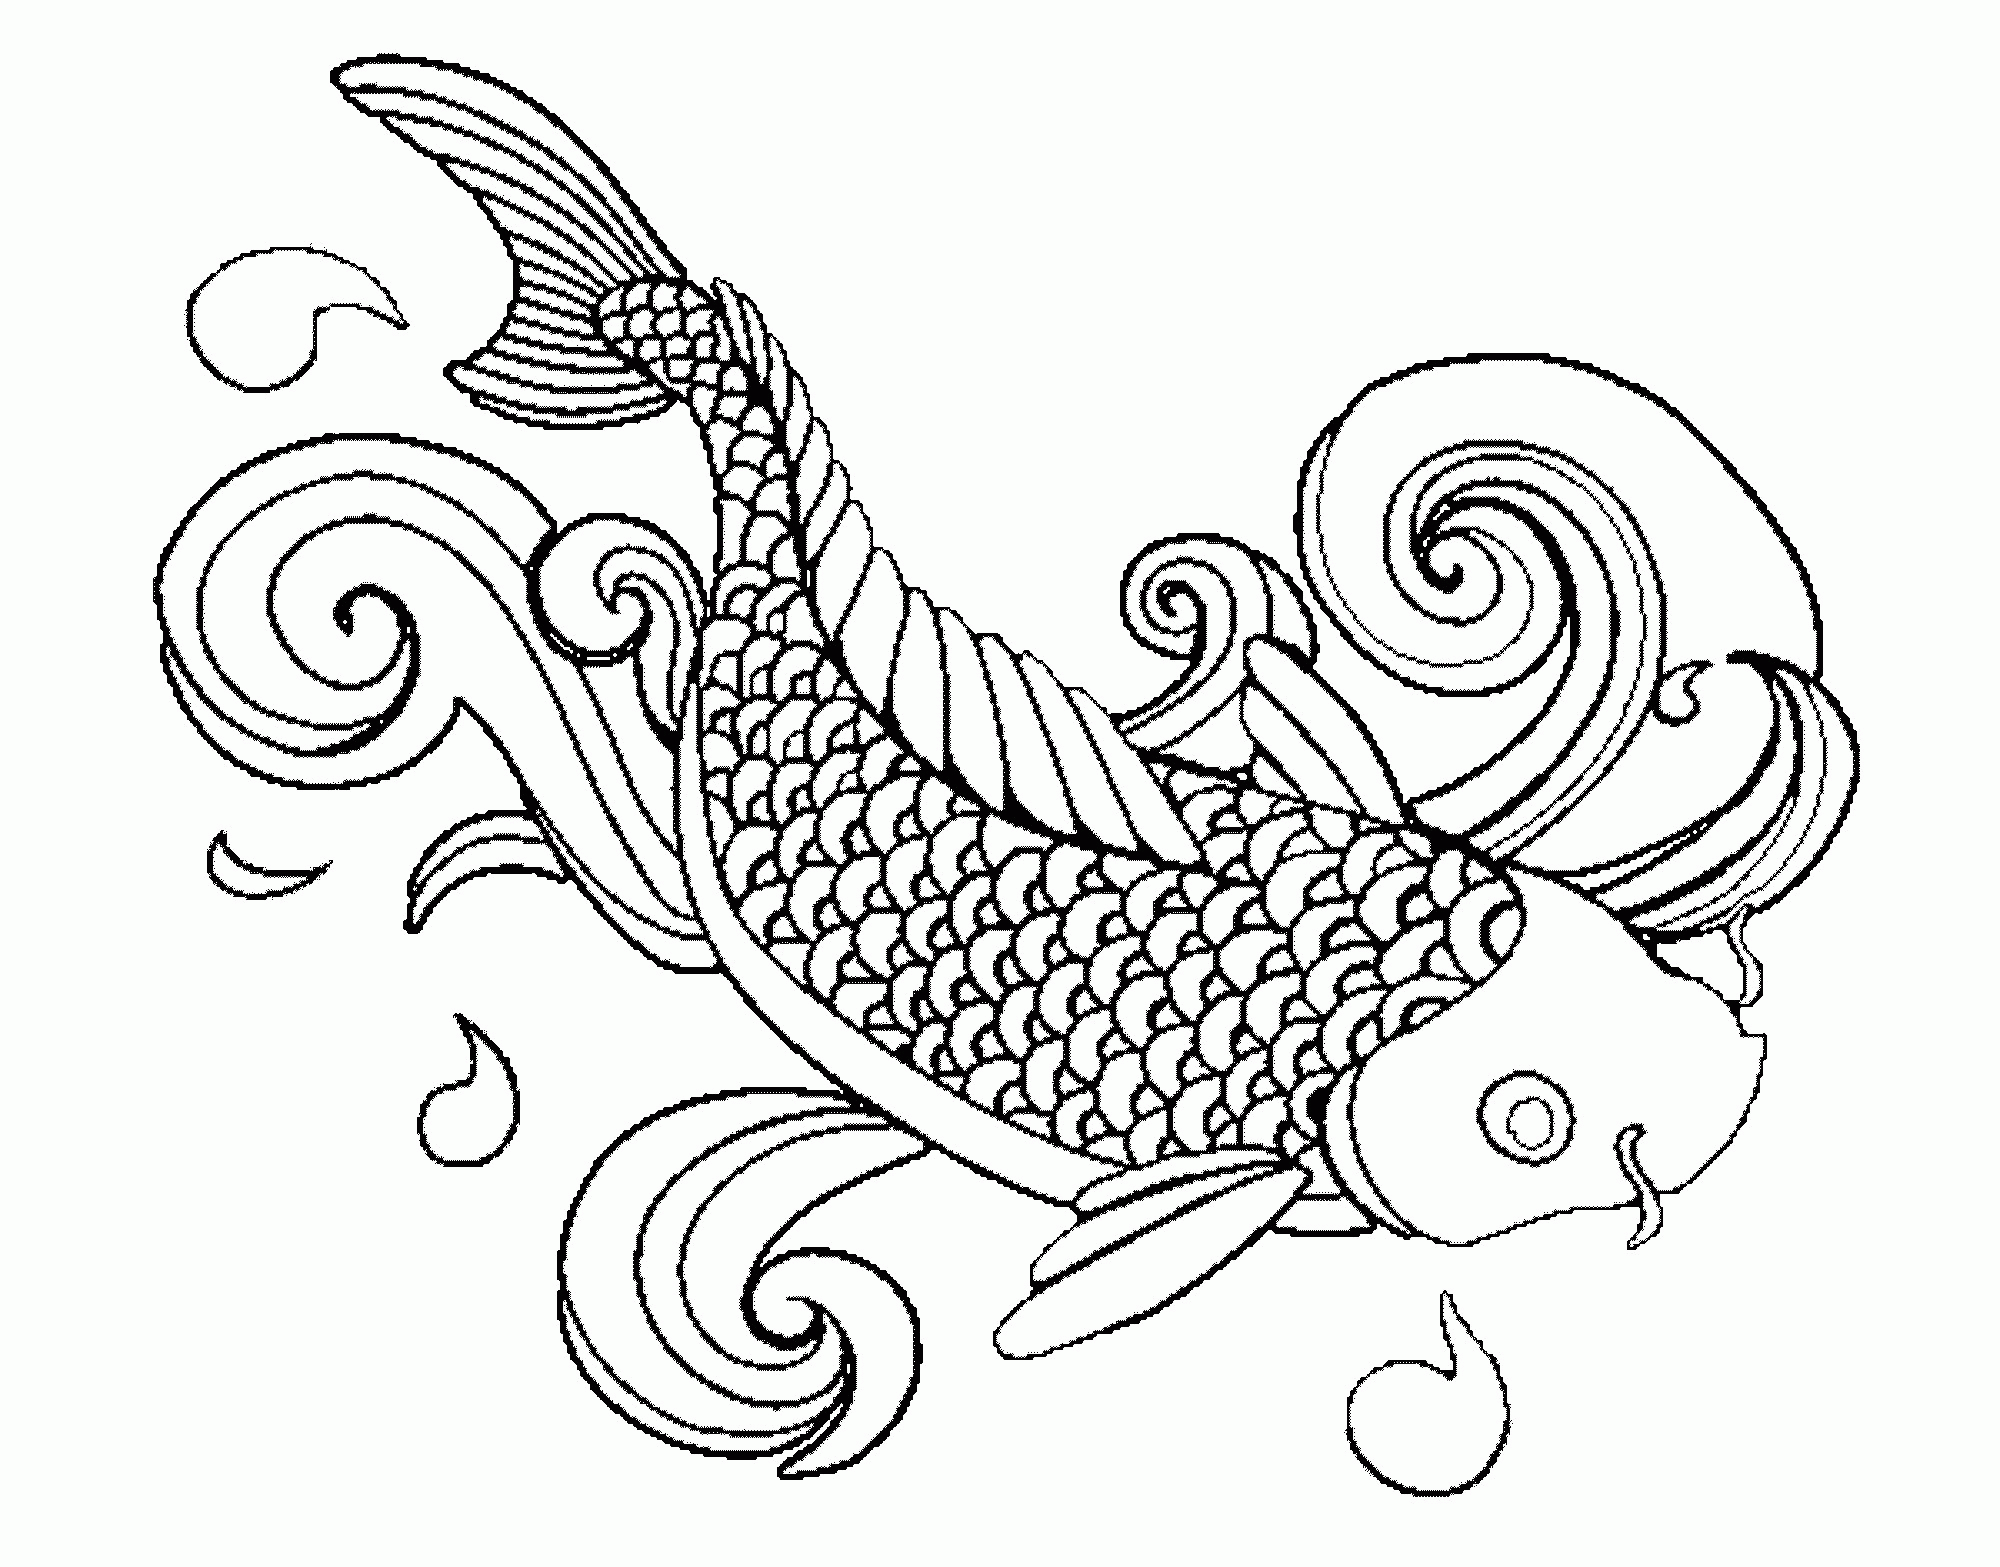 Koi Coloring Pages Adults 4 Jpg Home